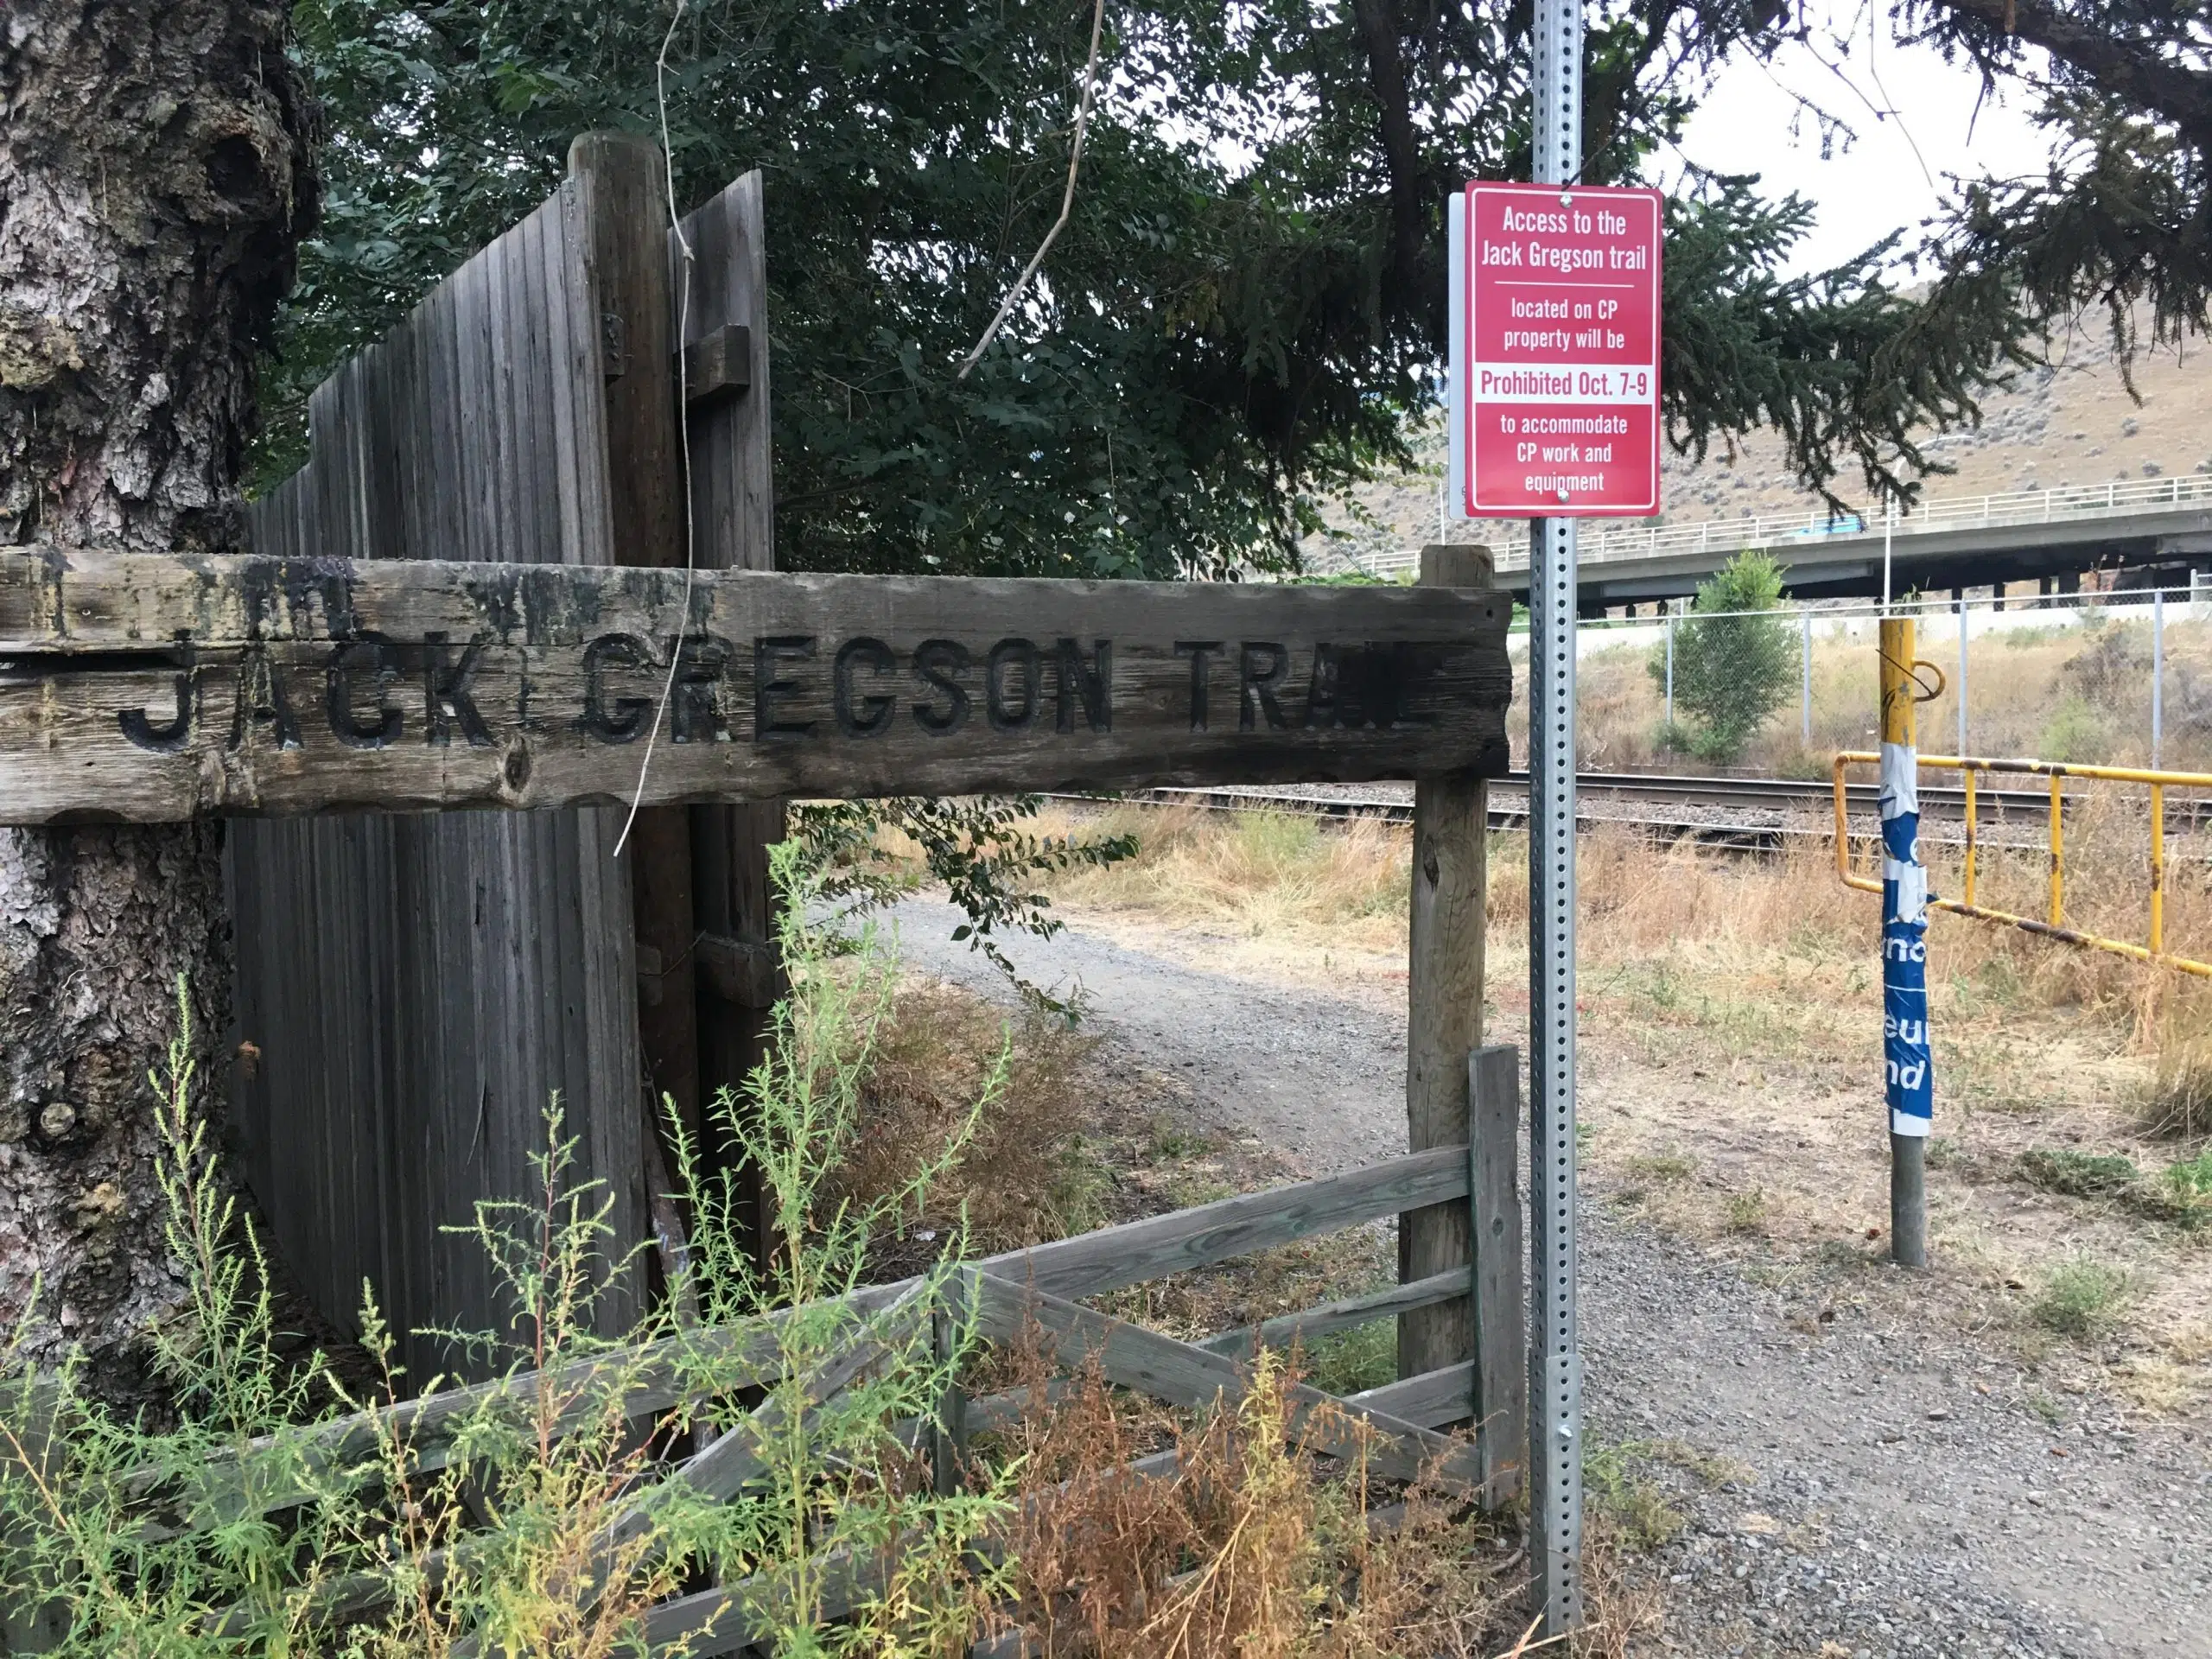 CP Rail permanently closing trail in downtown Kamloops to make room for track expansion